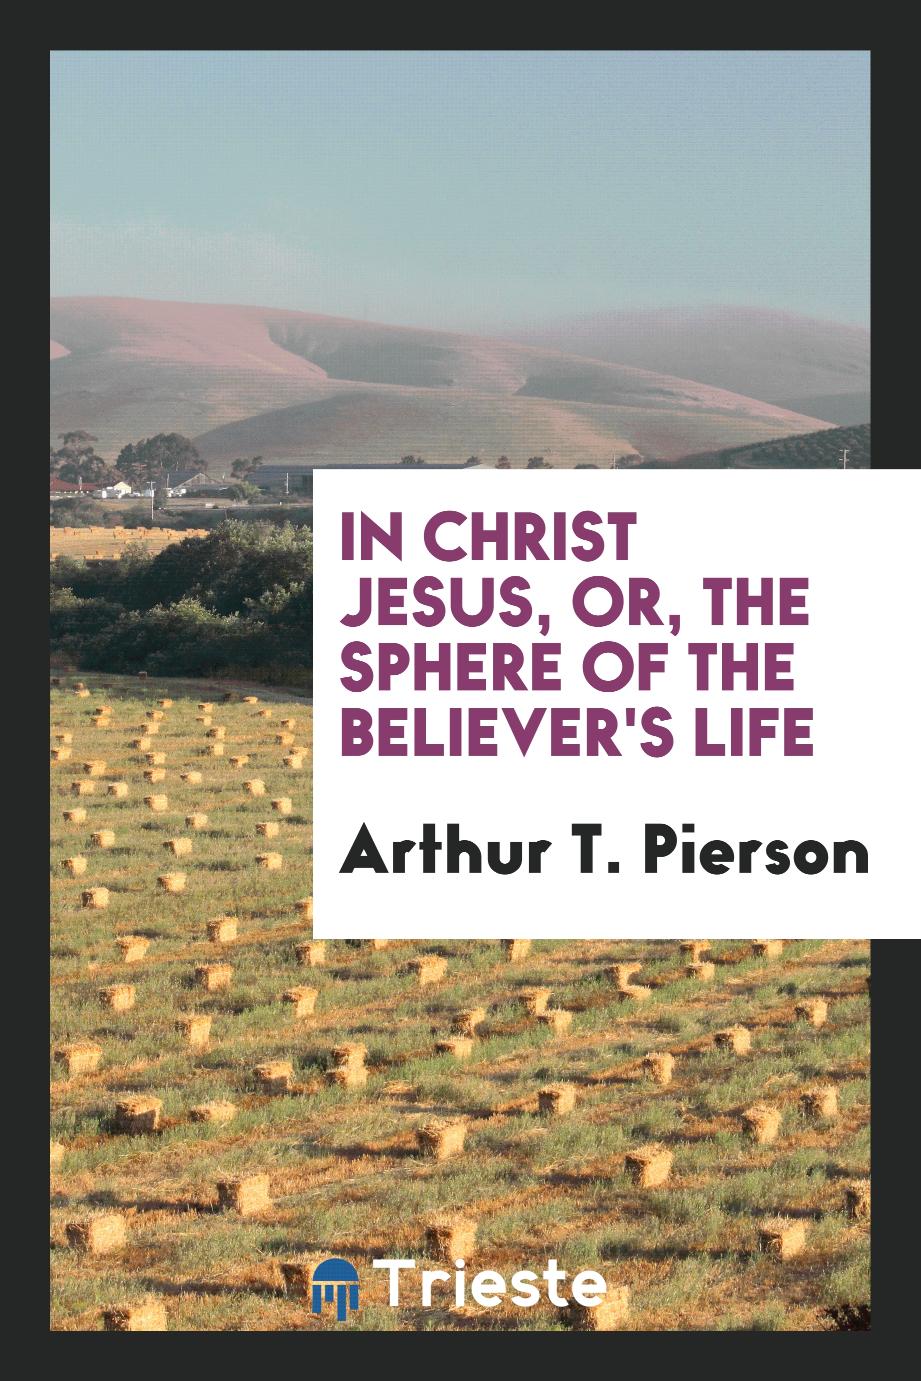 In Christ Jesus, or, The sphere of the believer's life